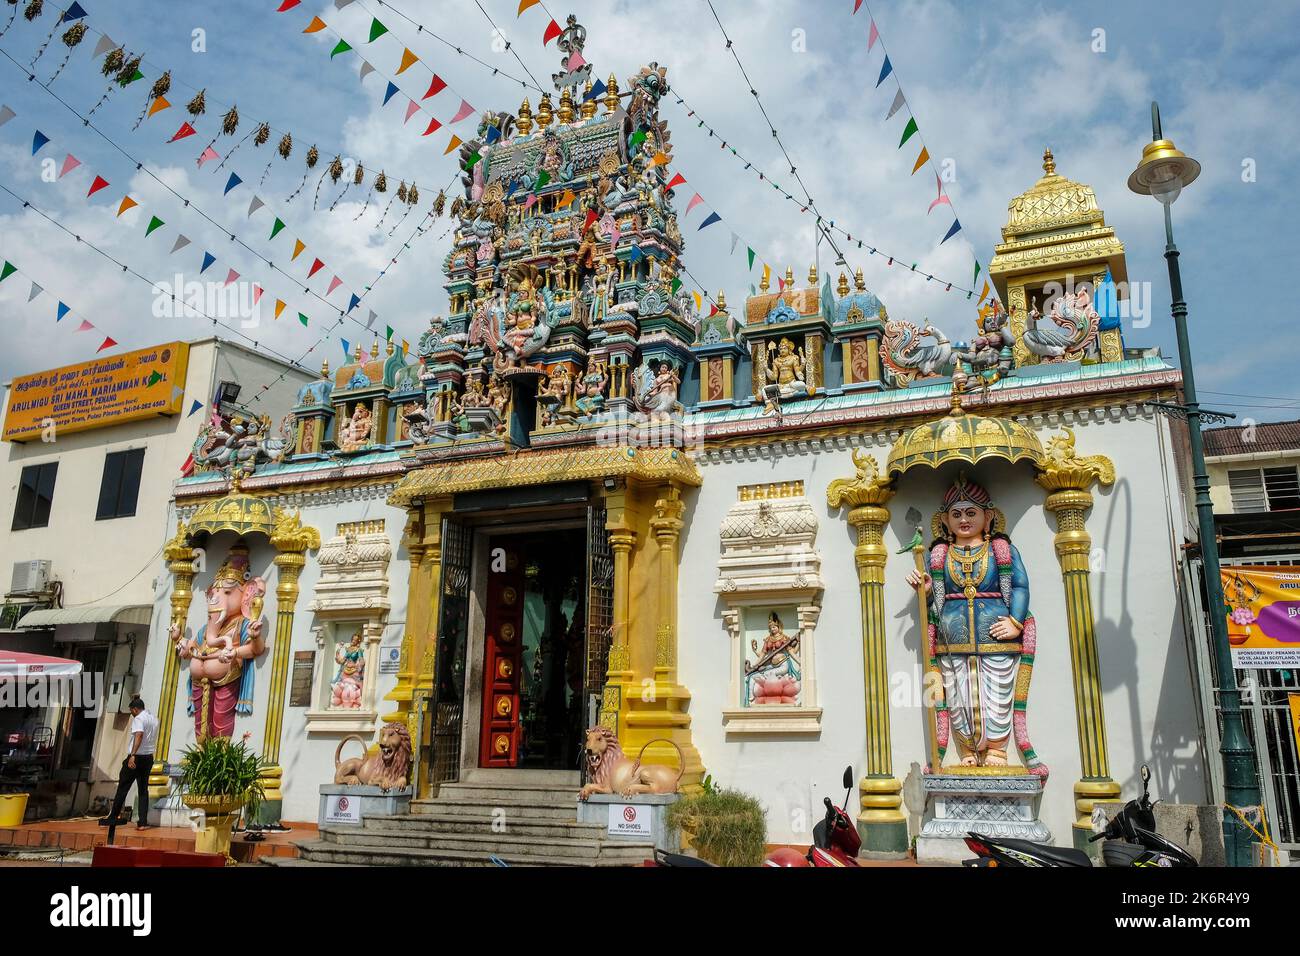 George Town, Malaysia - October 2022: Views of the Sri Mahamariamman Temple, one of the oldest Hindu temples in Penang on October 11, 2022. Stock Photo